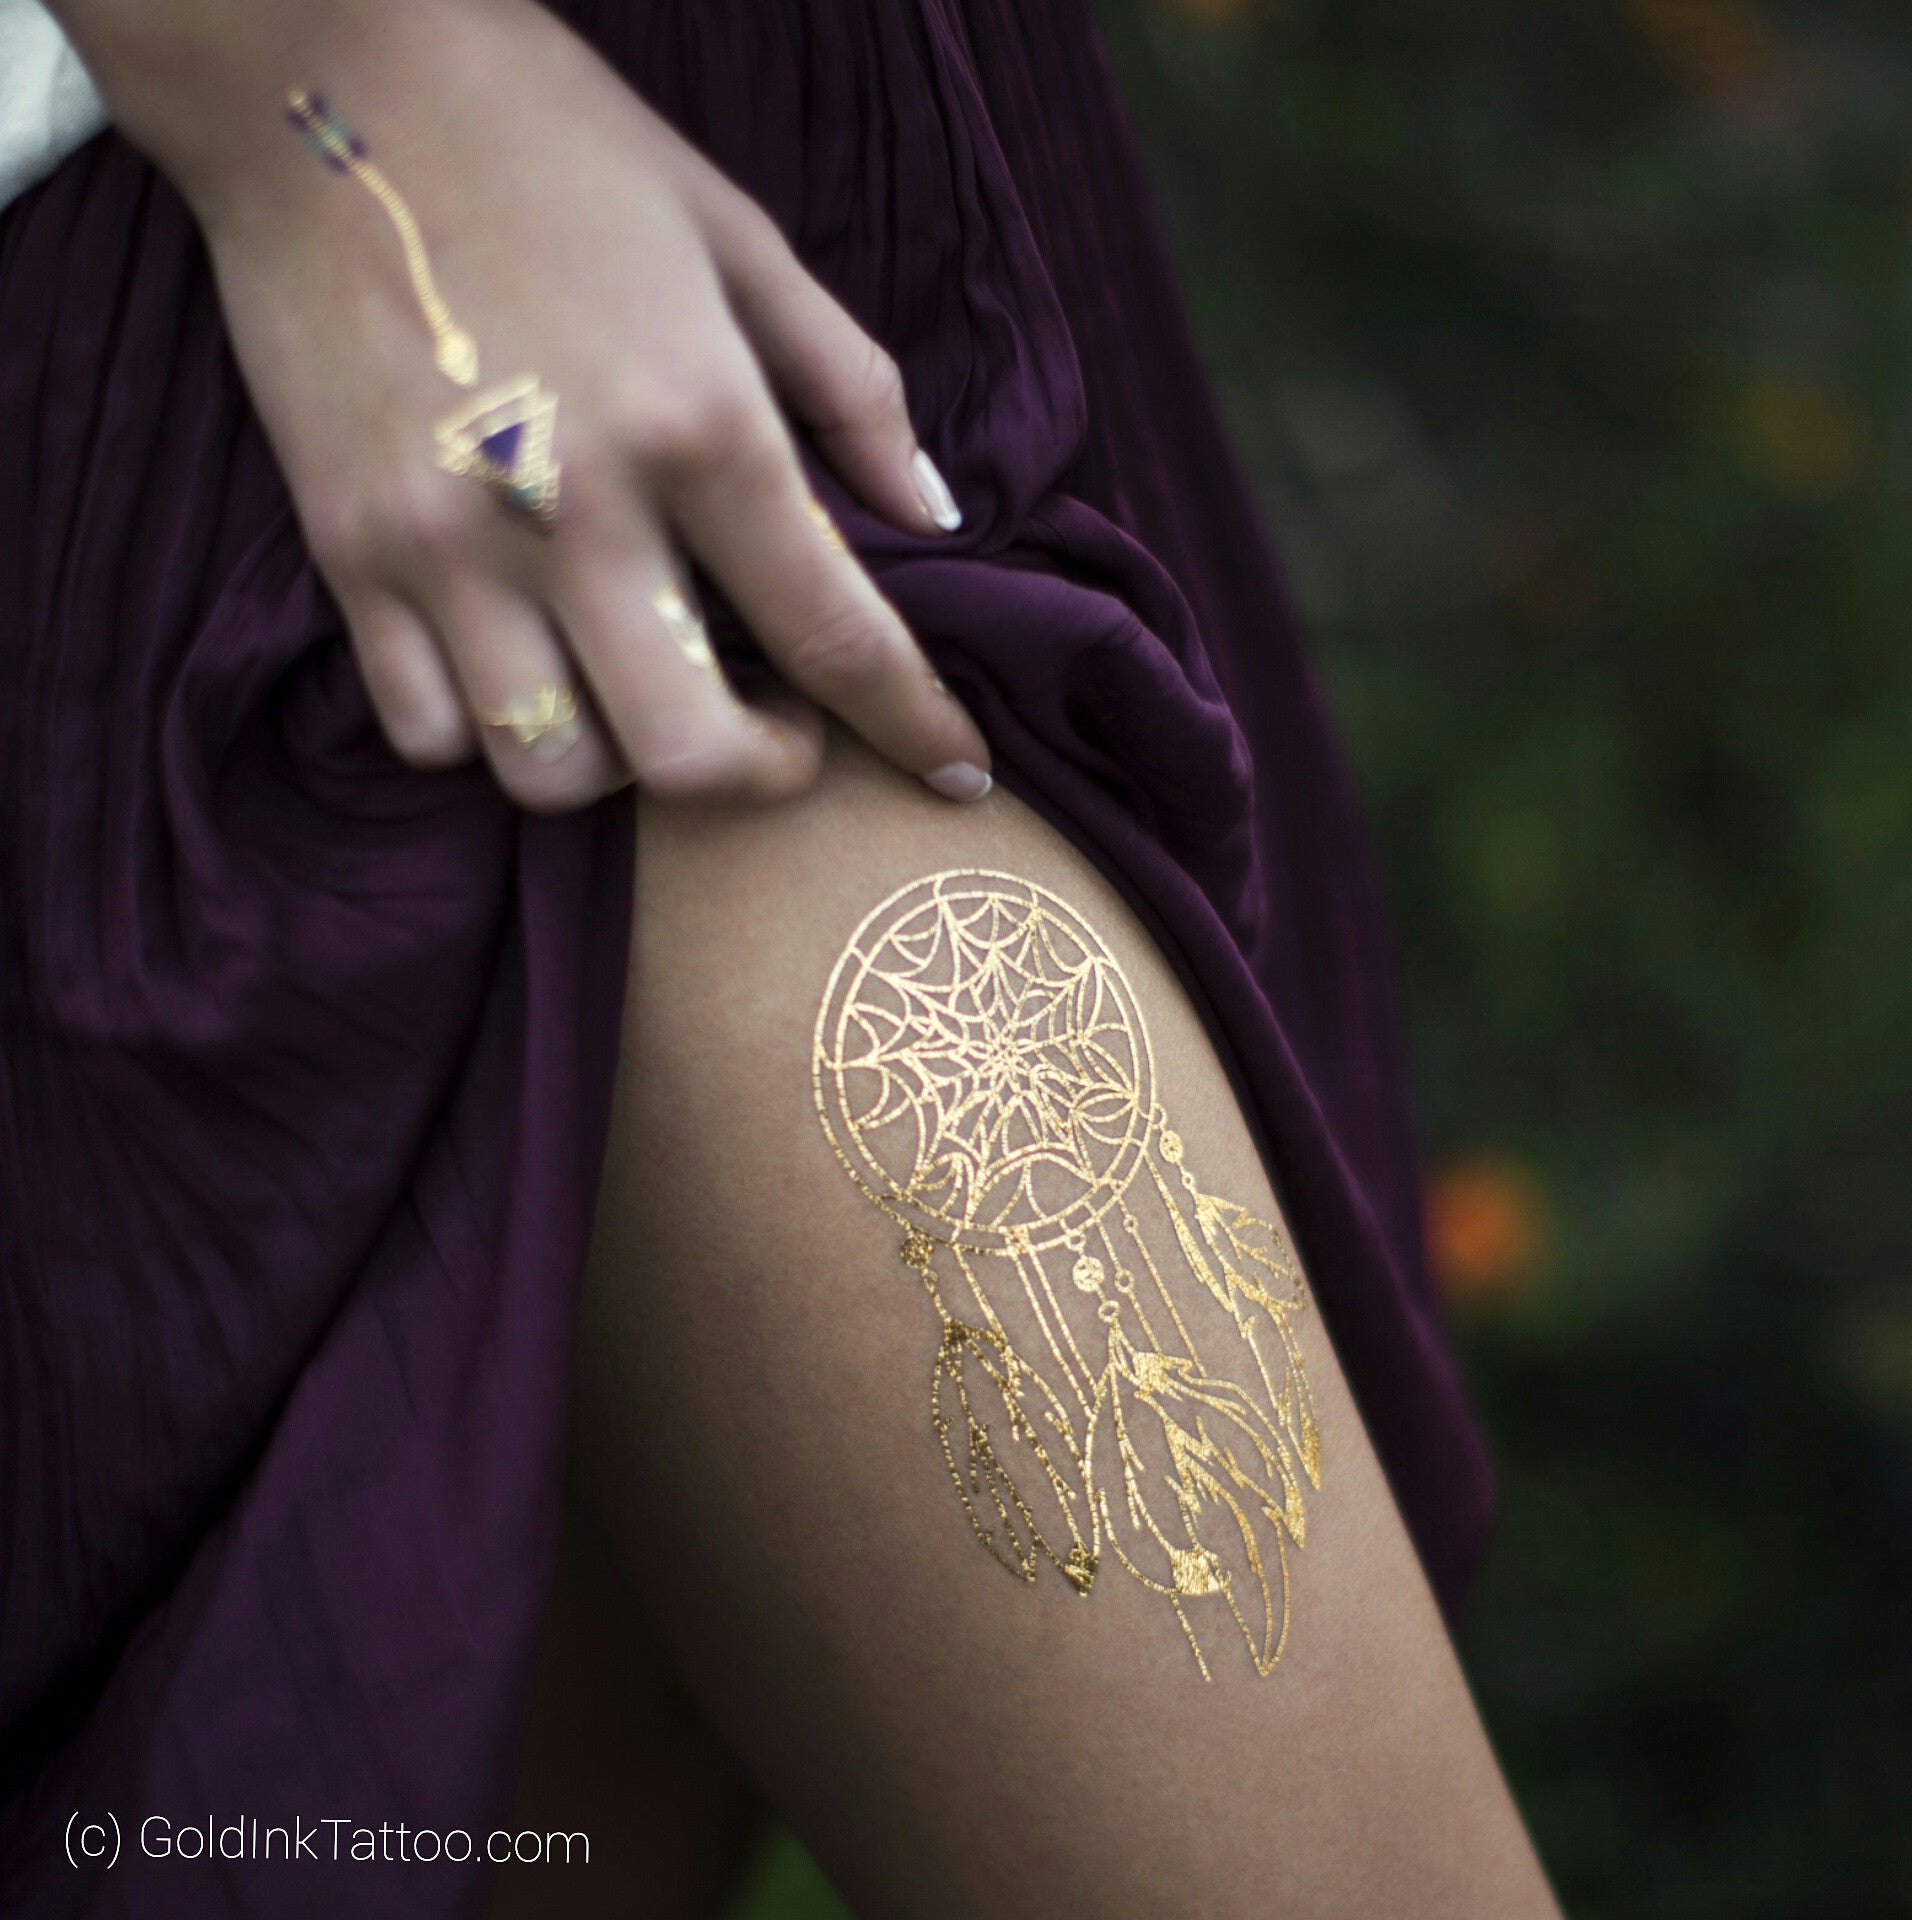 Golden Tattoo Ink A Real Deal or a False Claim  Saved Tattoo